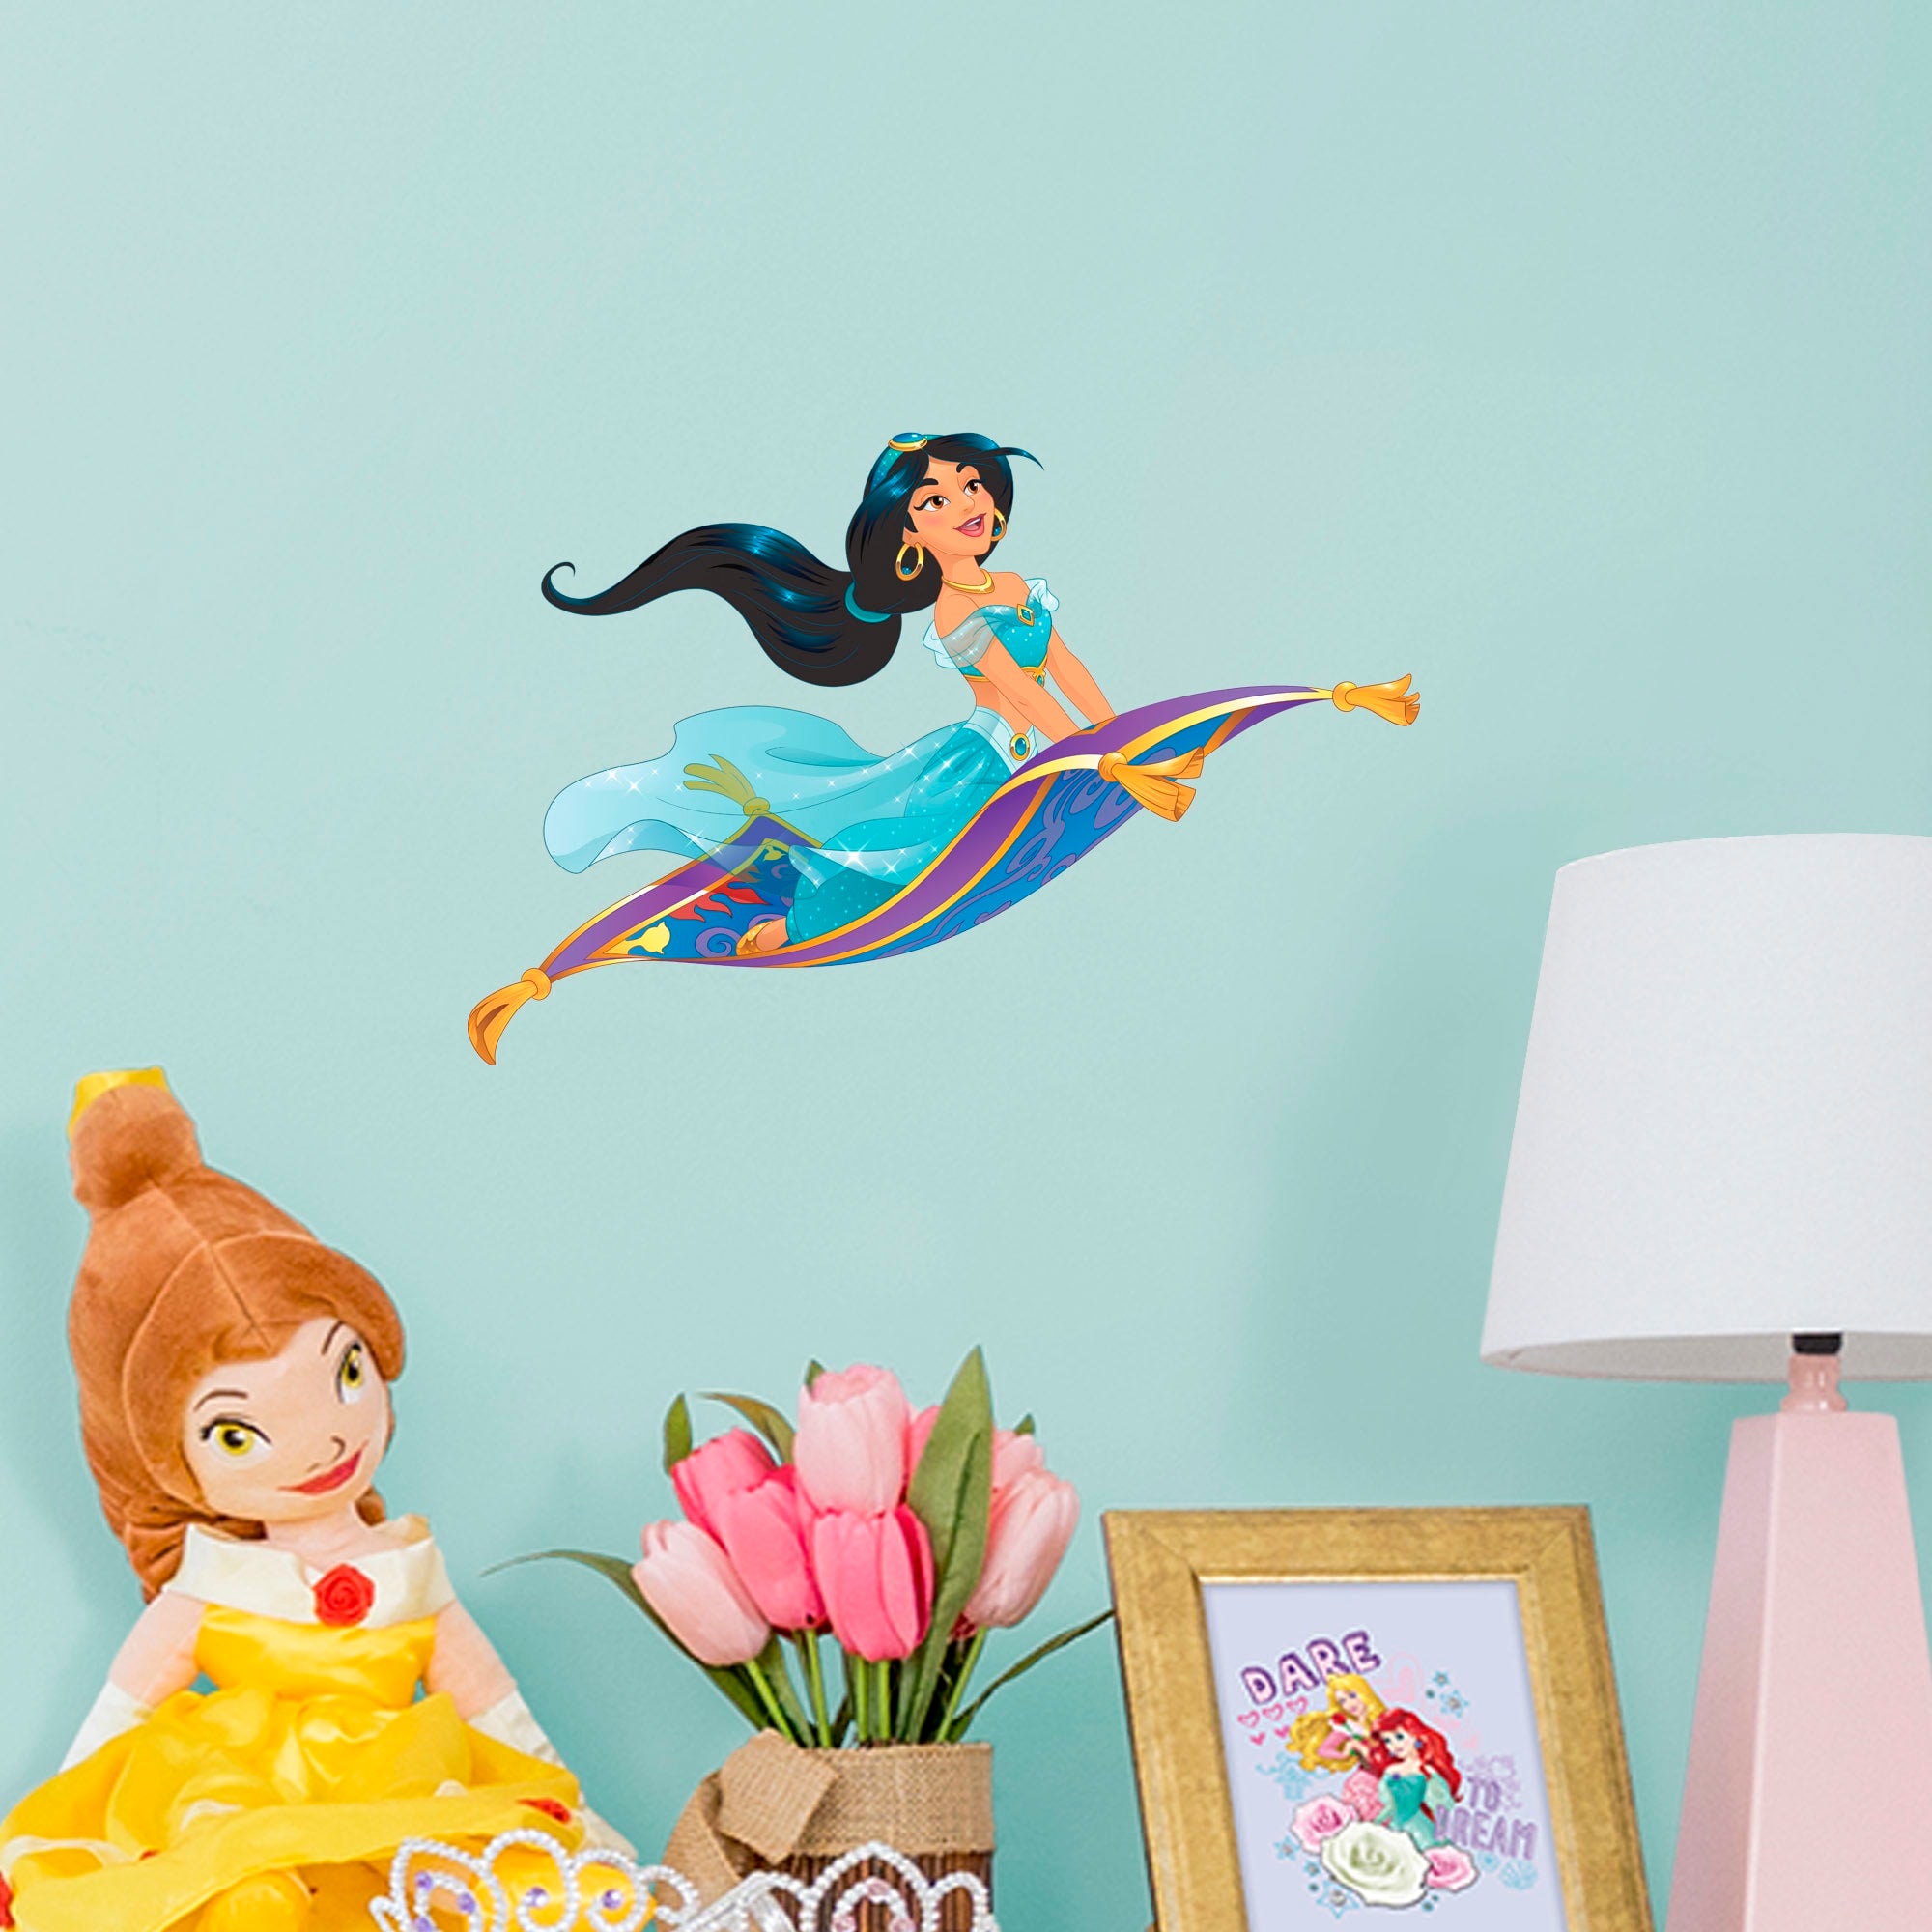 Jasmine: Flying Carpet Ride - Officially Licensed Disney Removable Wall Decal Large by Fathead | Vinyl